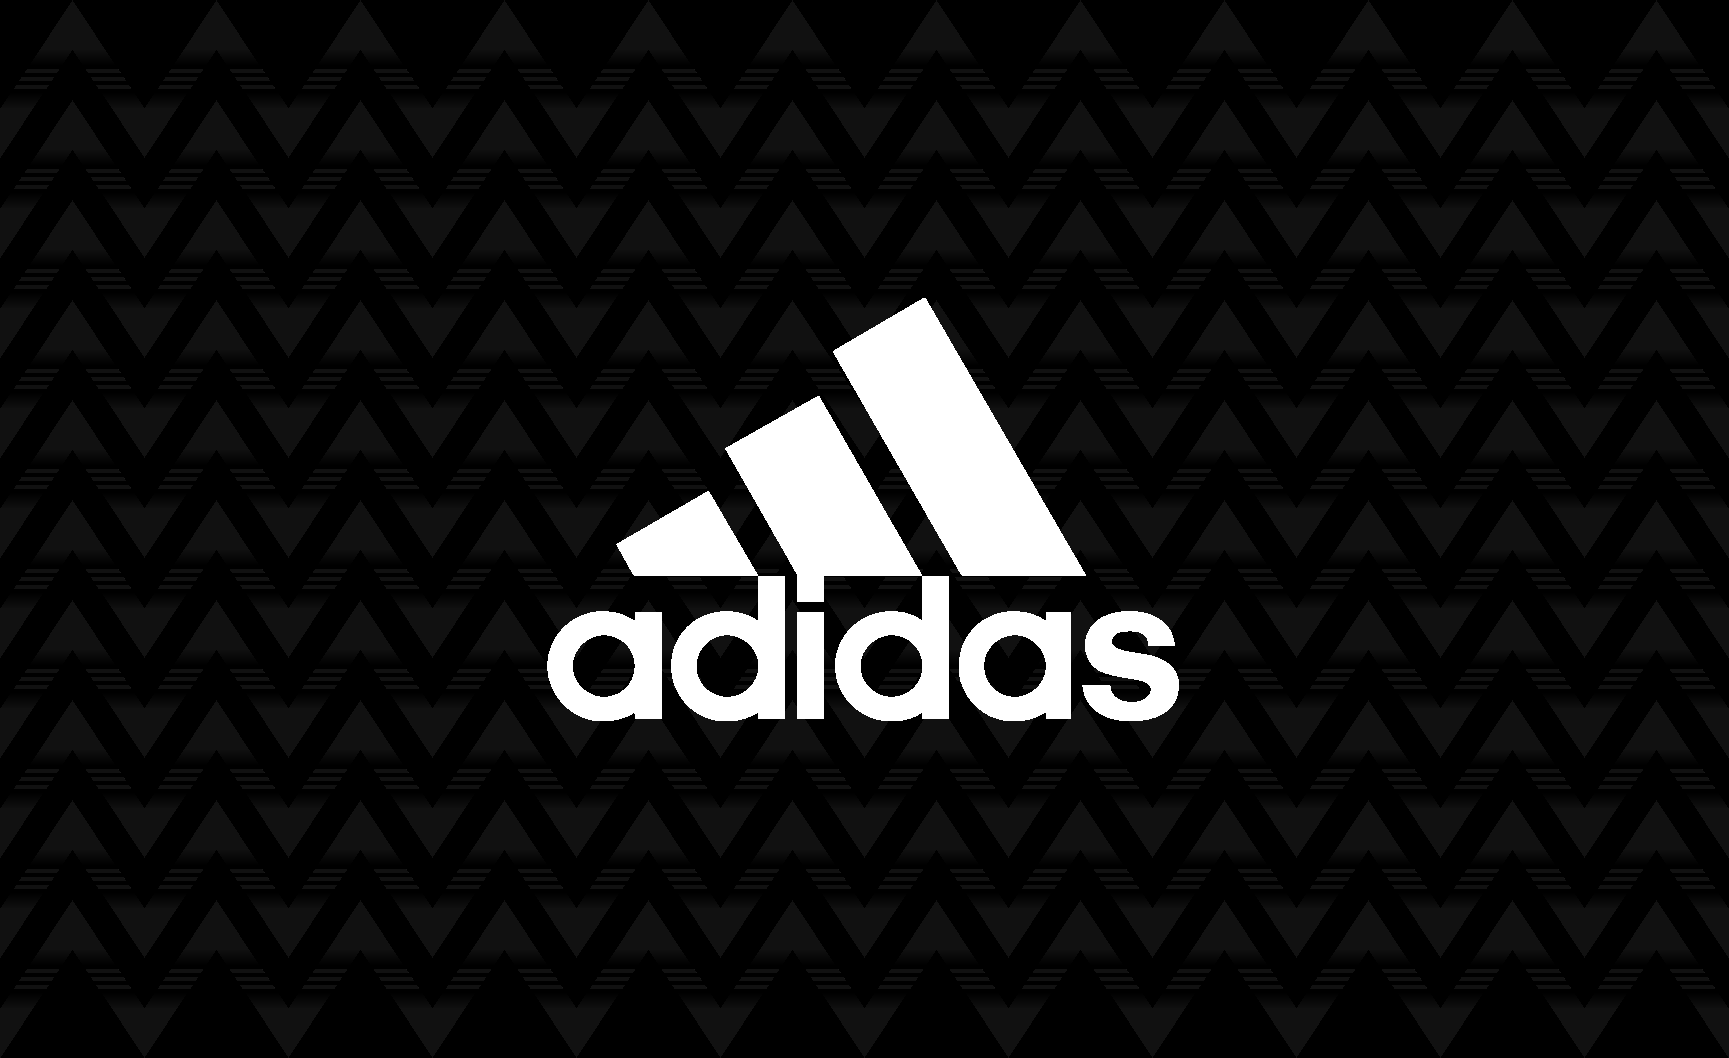 Adidas Soccer Logo - Adidas Universal Soccer Template (In Stand By)